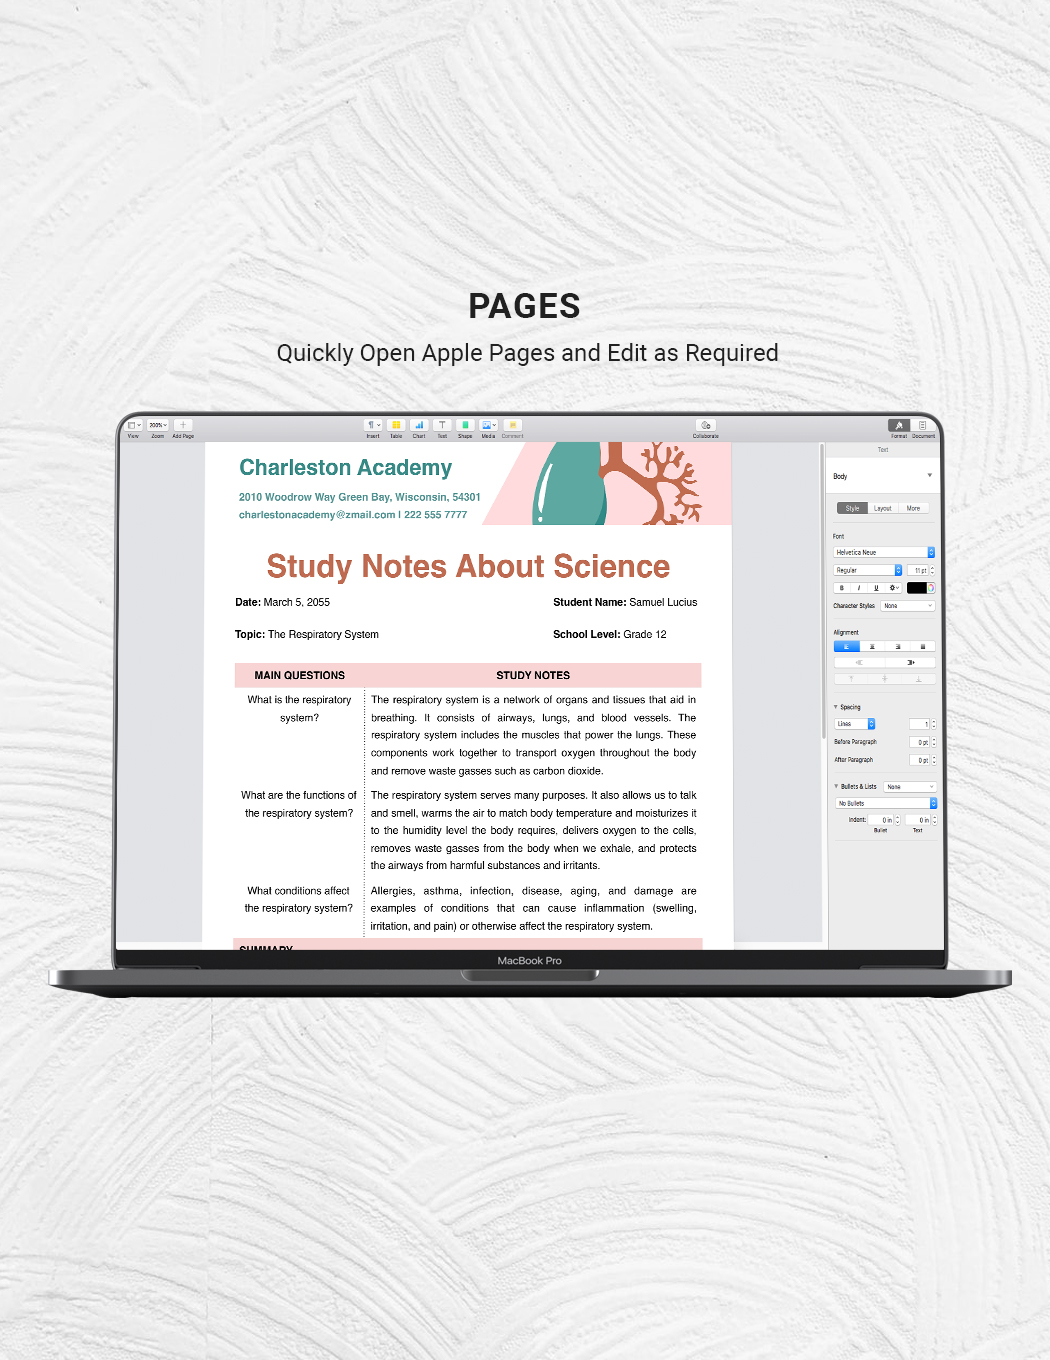 Respiratory Note-taking Template